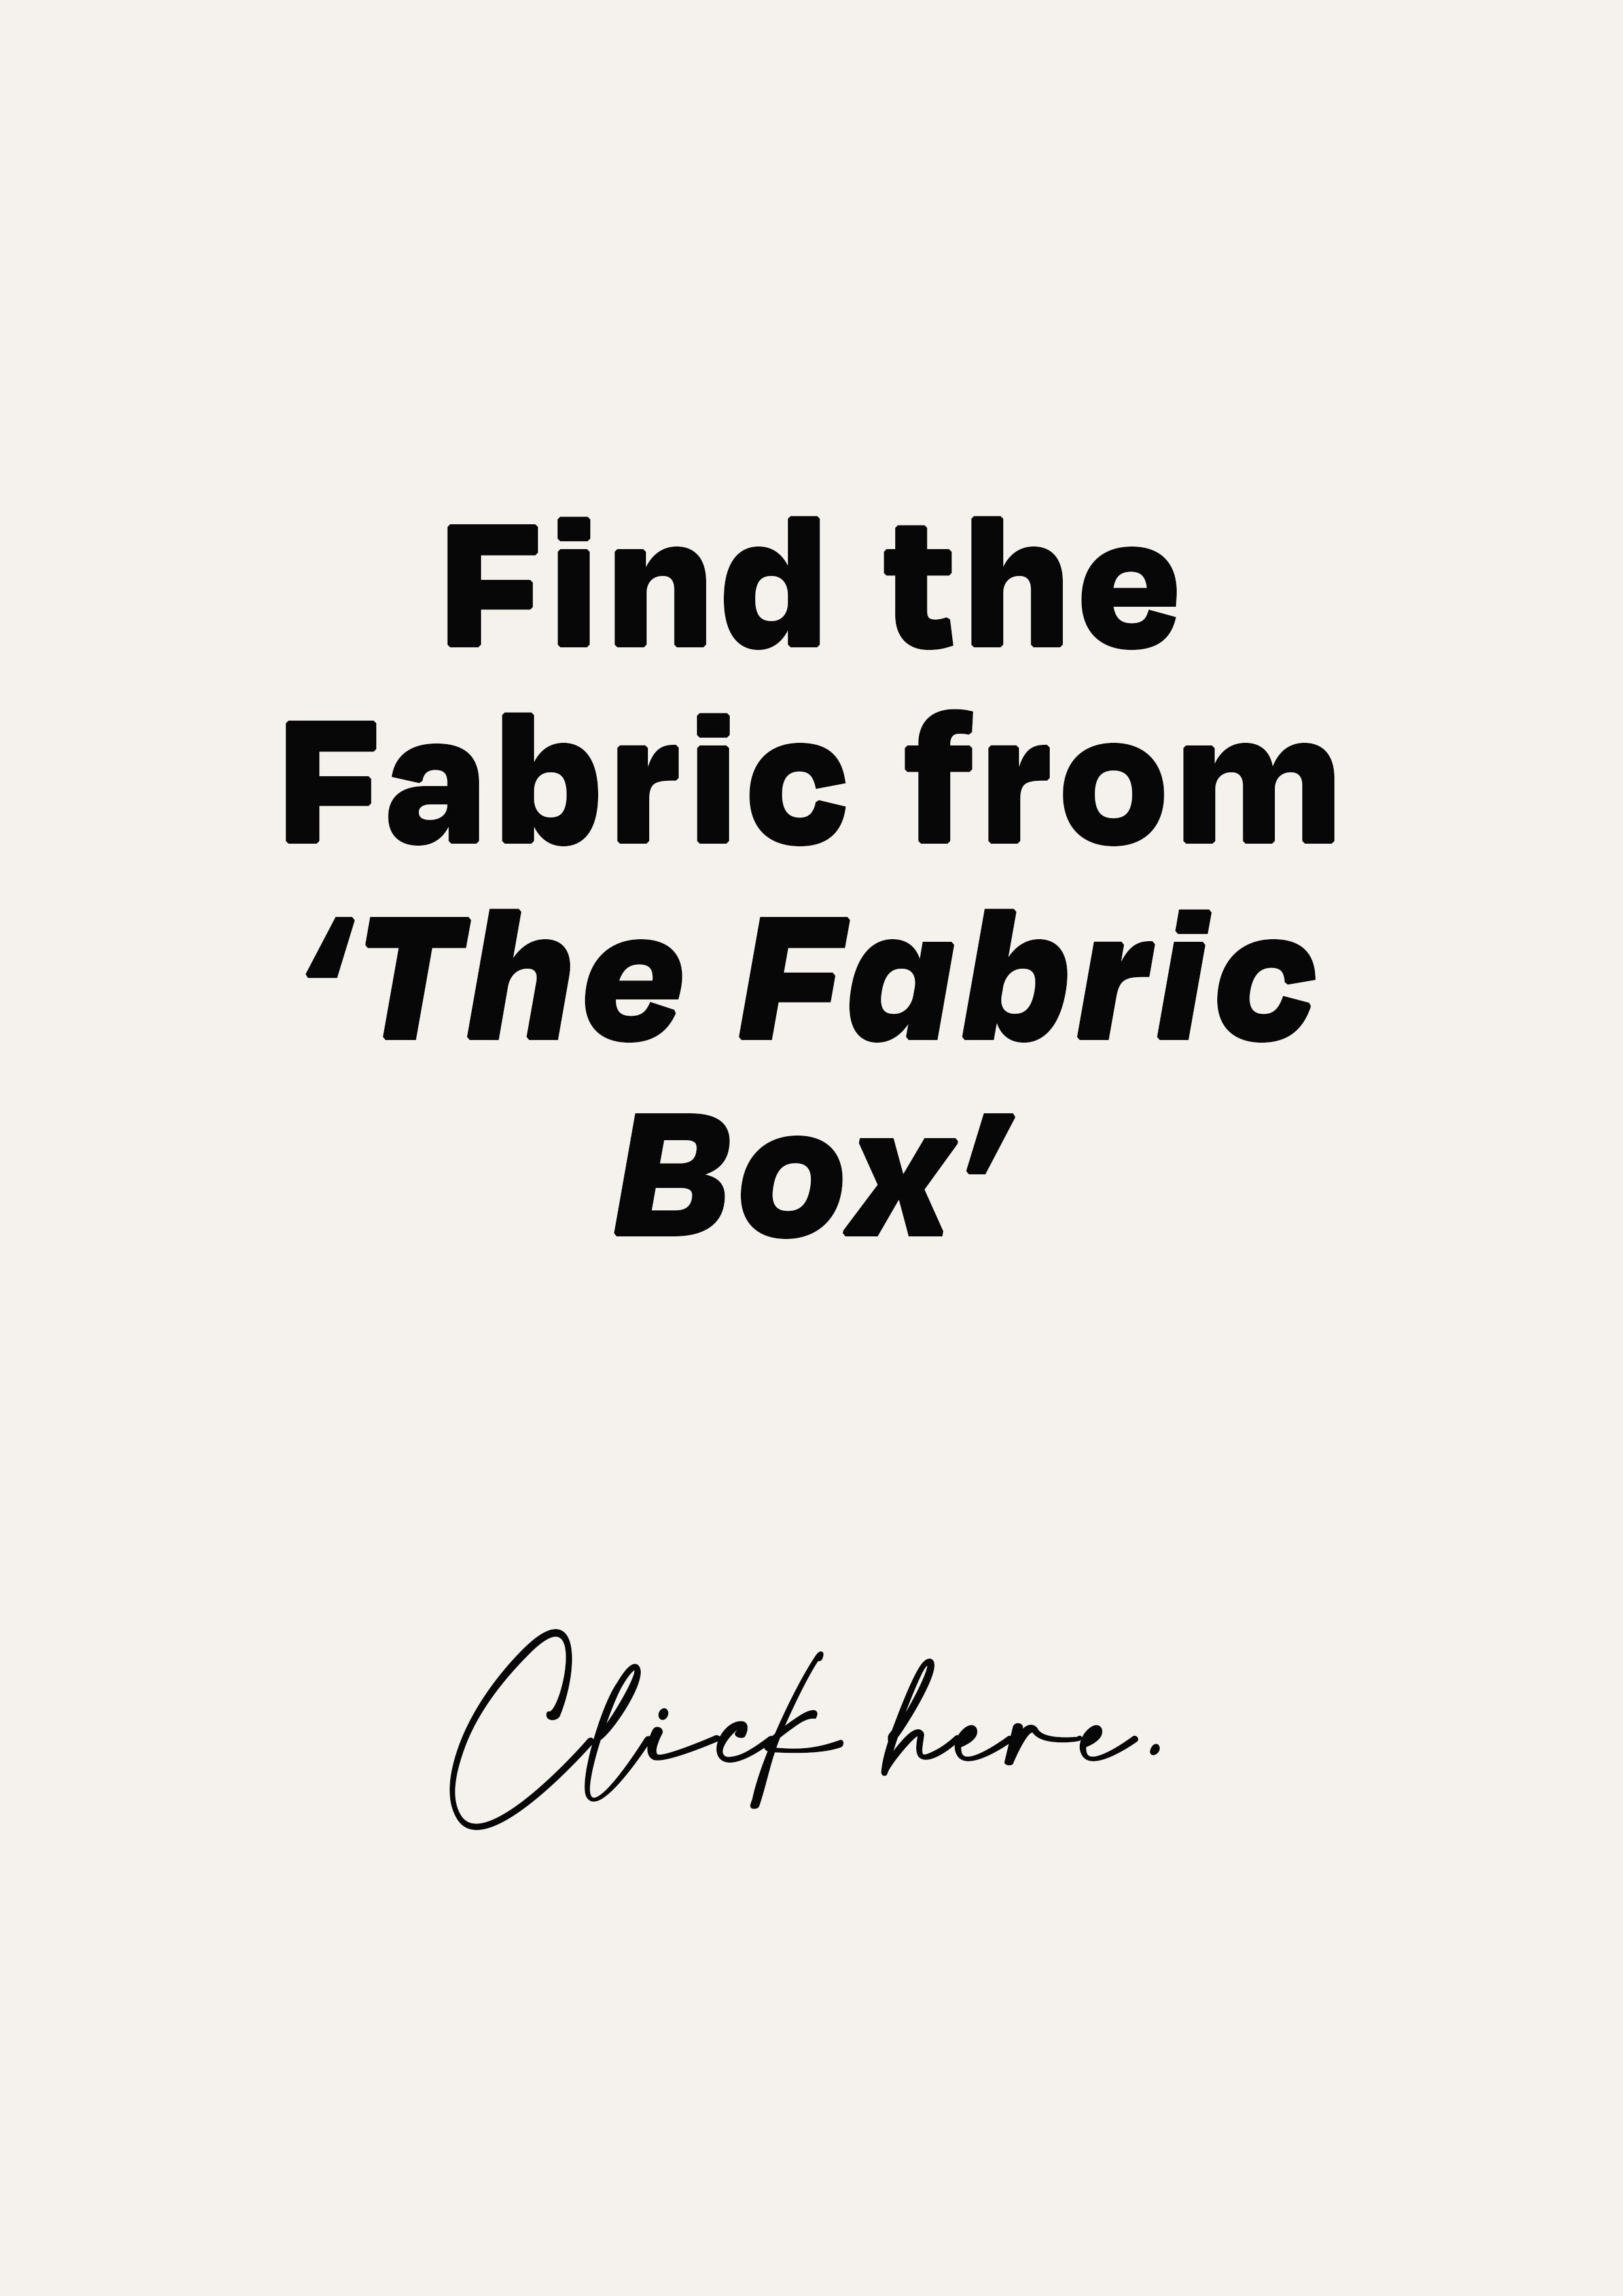 a4-click-here-fabricbox.jpg